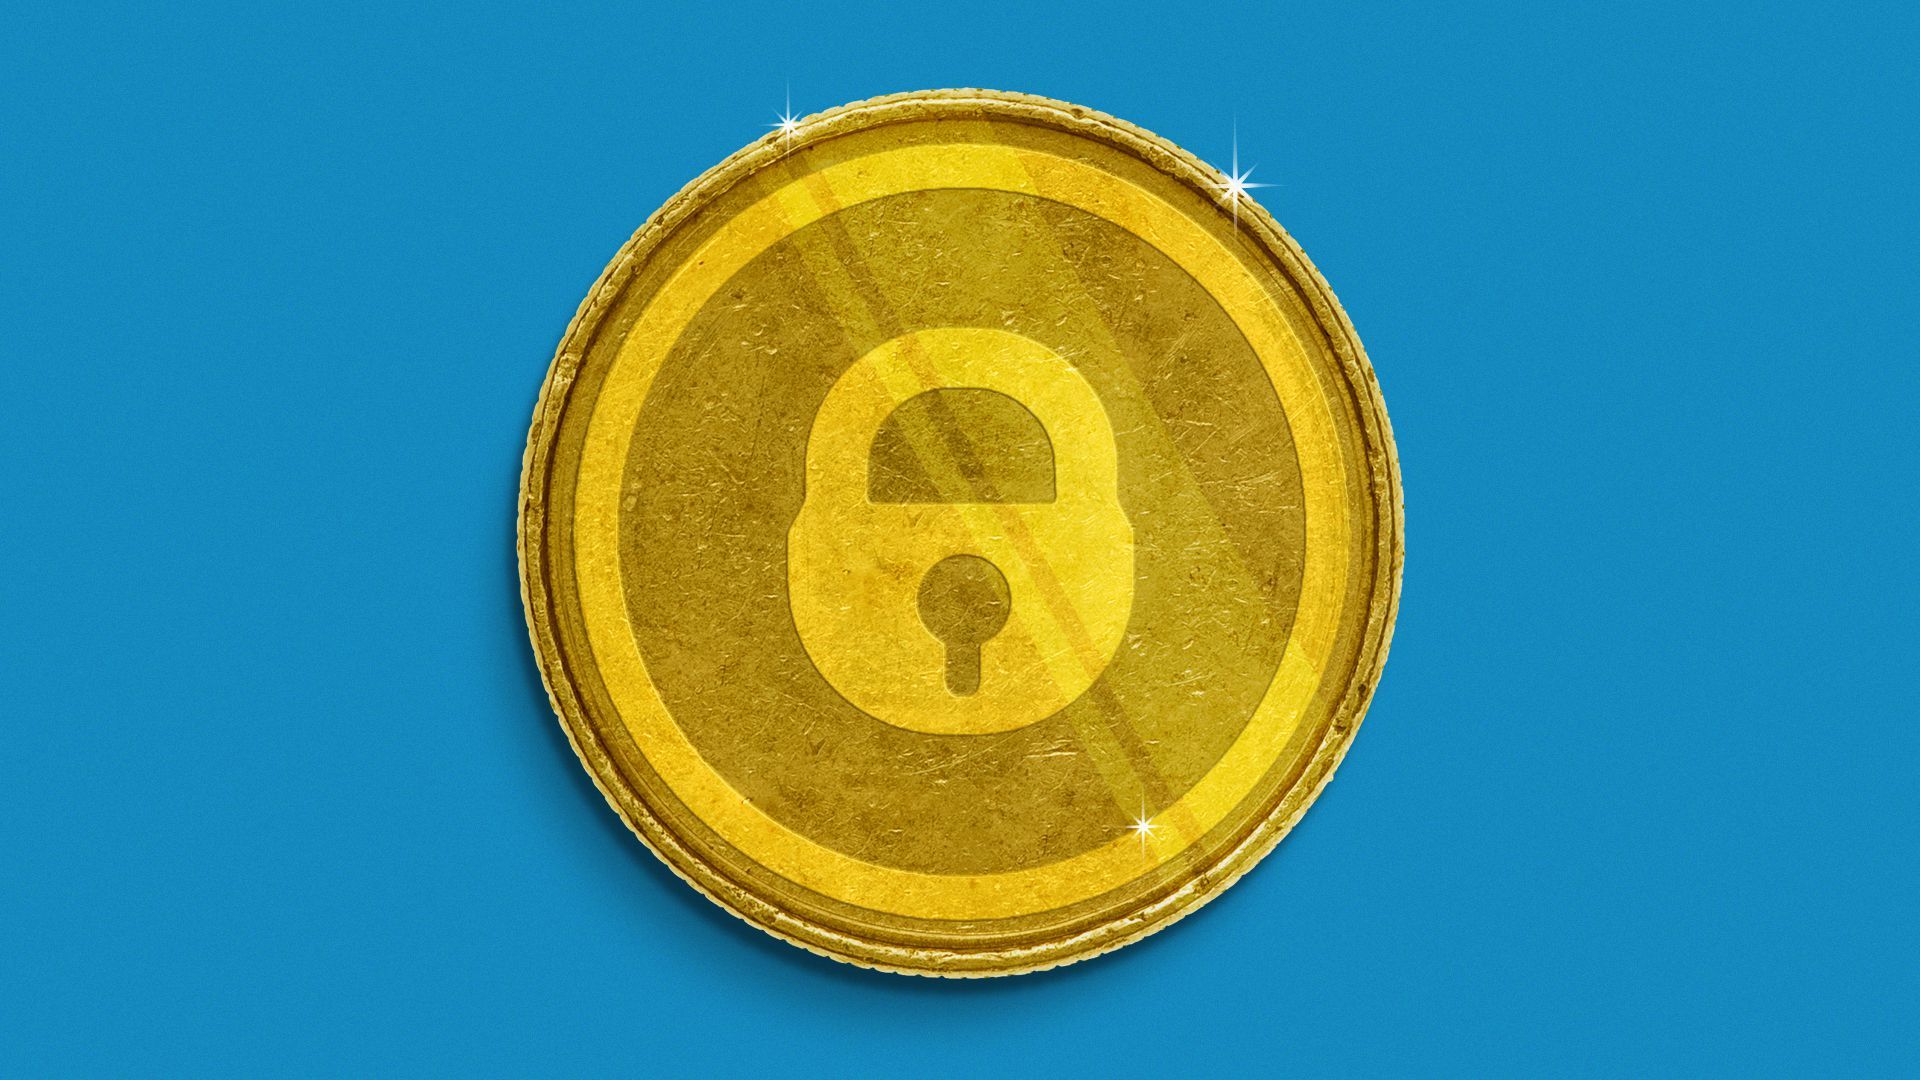 Illustration of a coin with the OnlyFans logo on it.